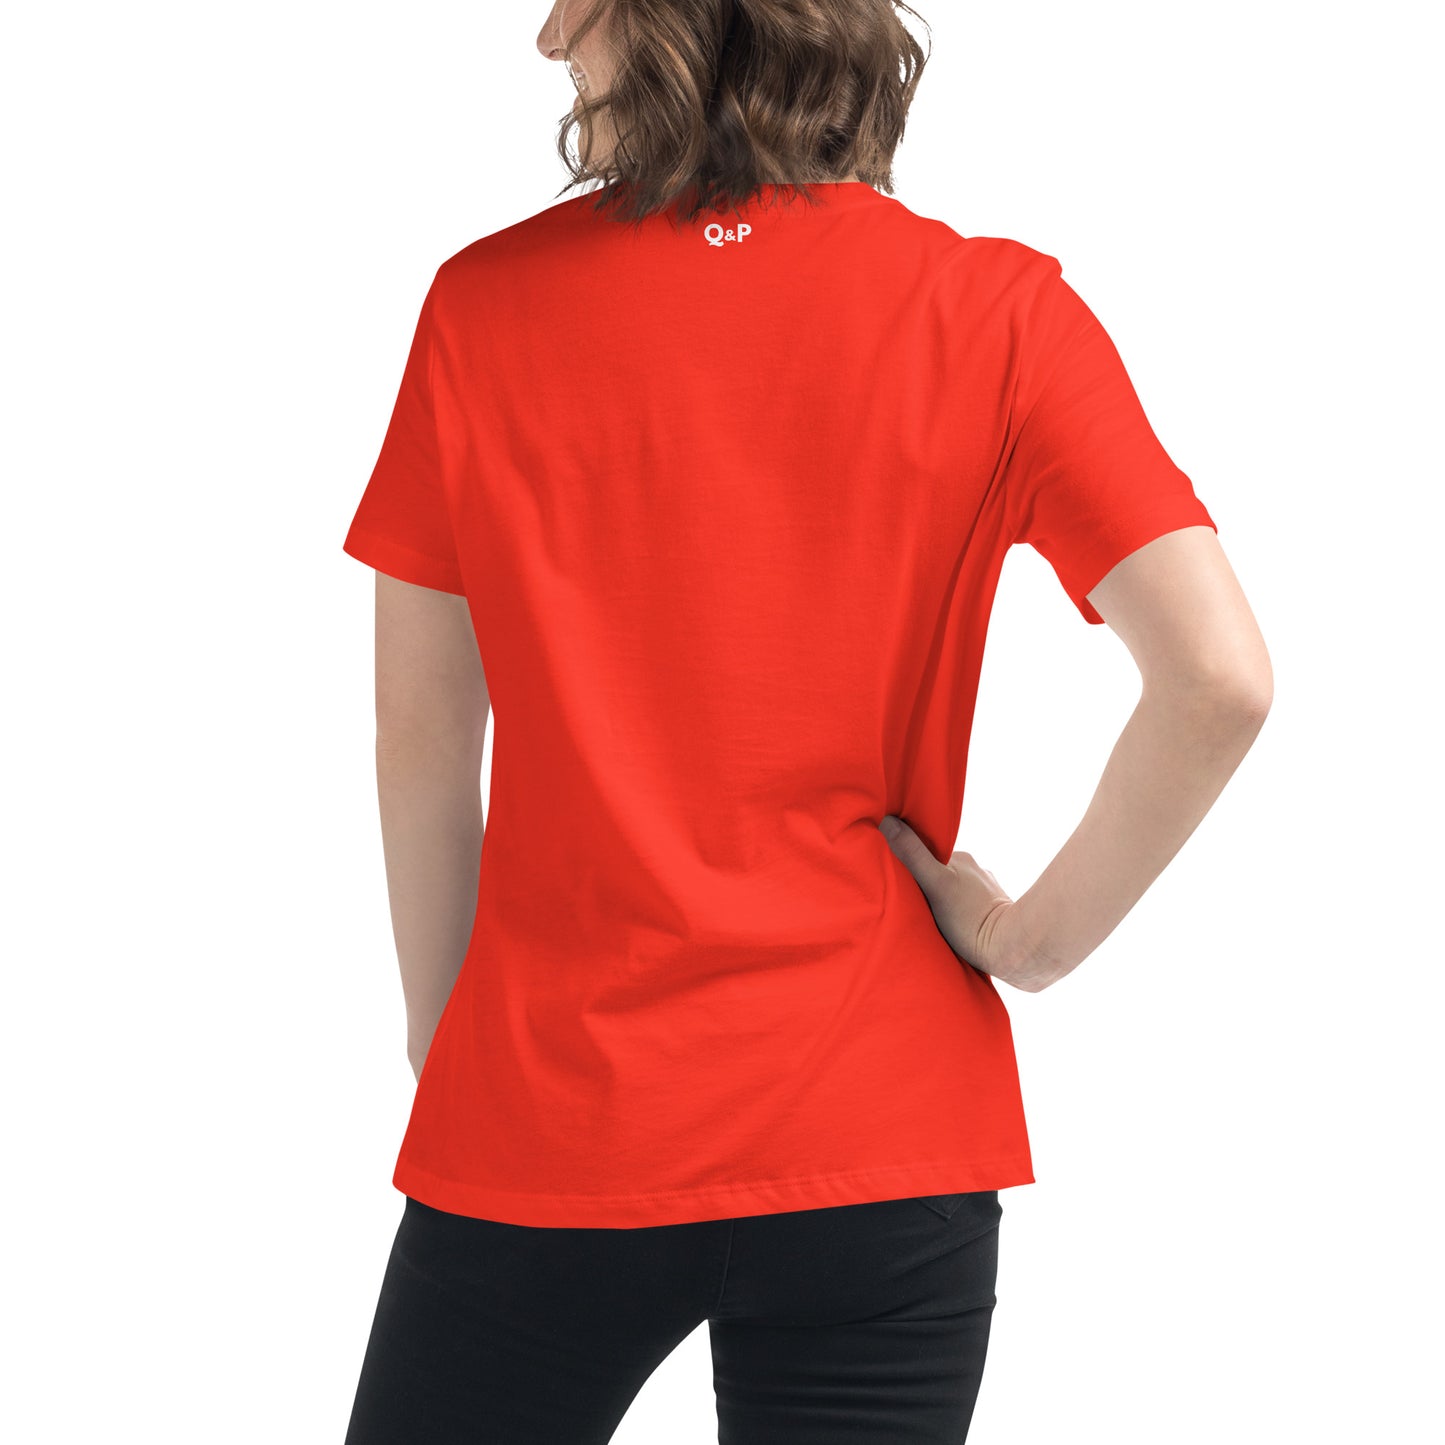 Word of the Father - Women's Relaxed T-Shirt